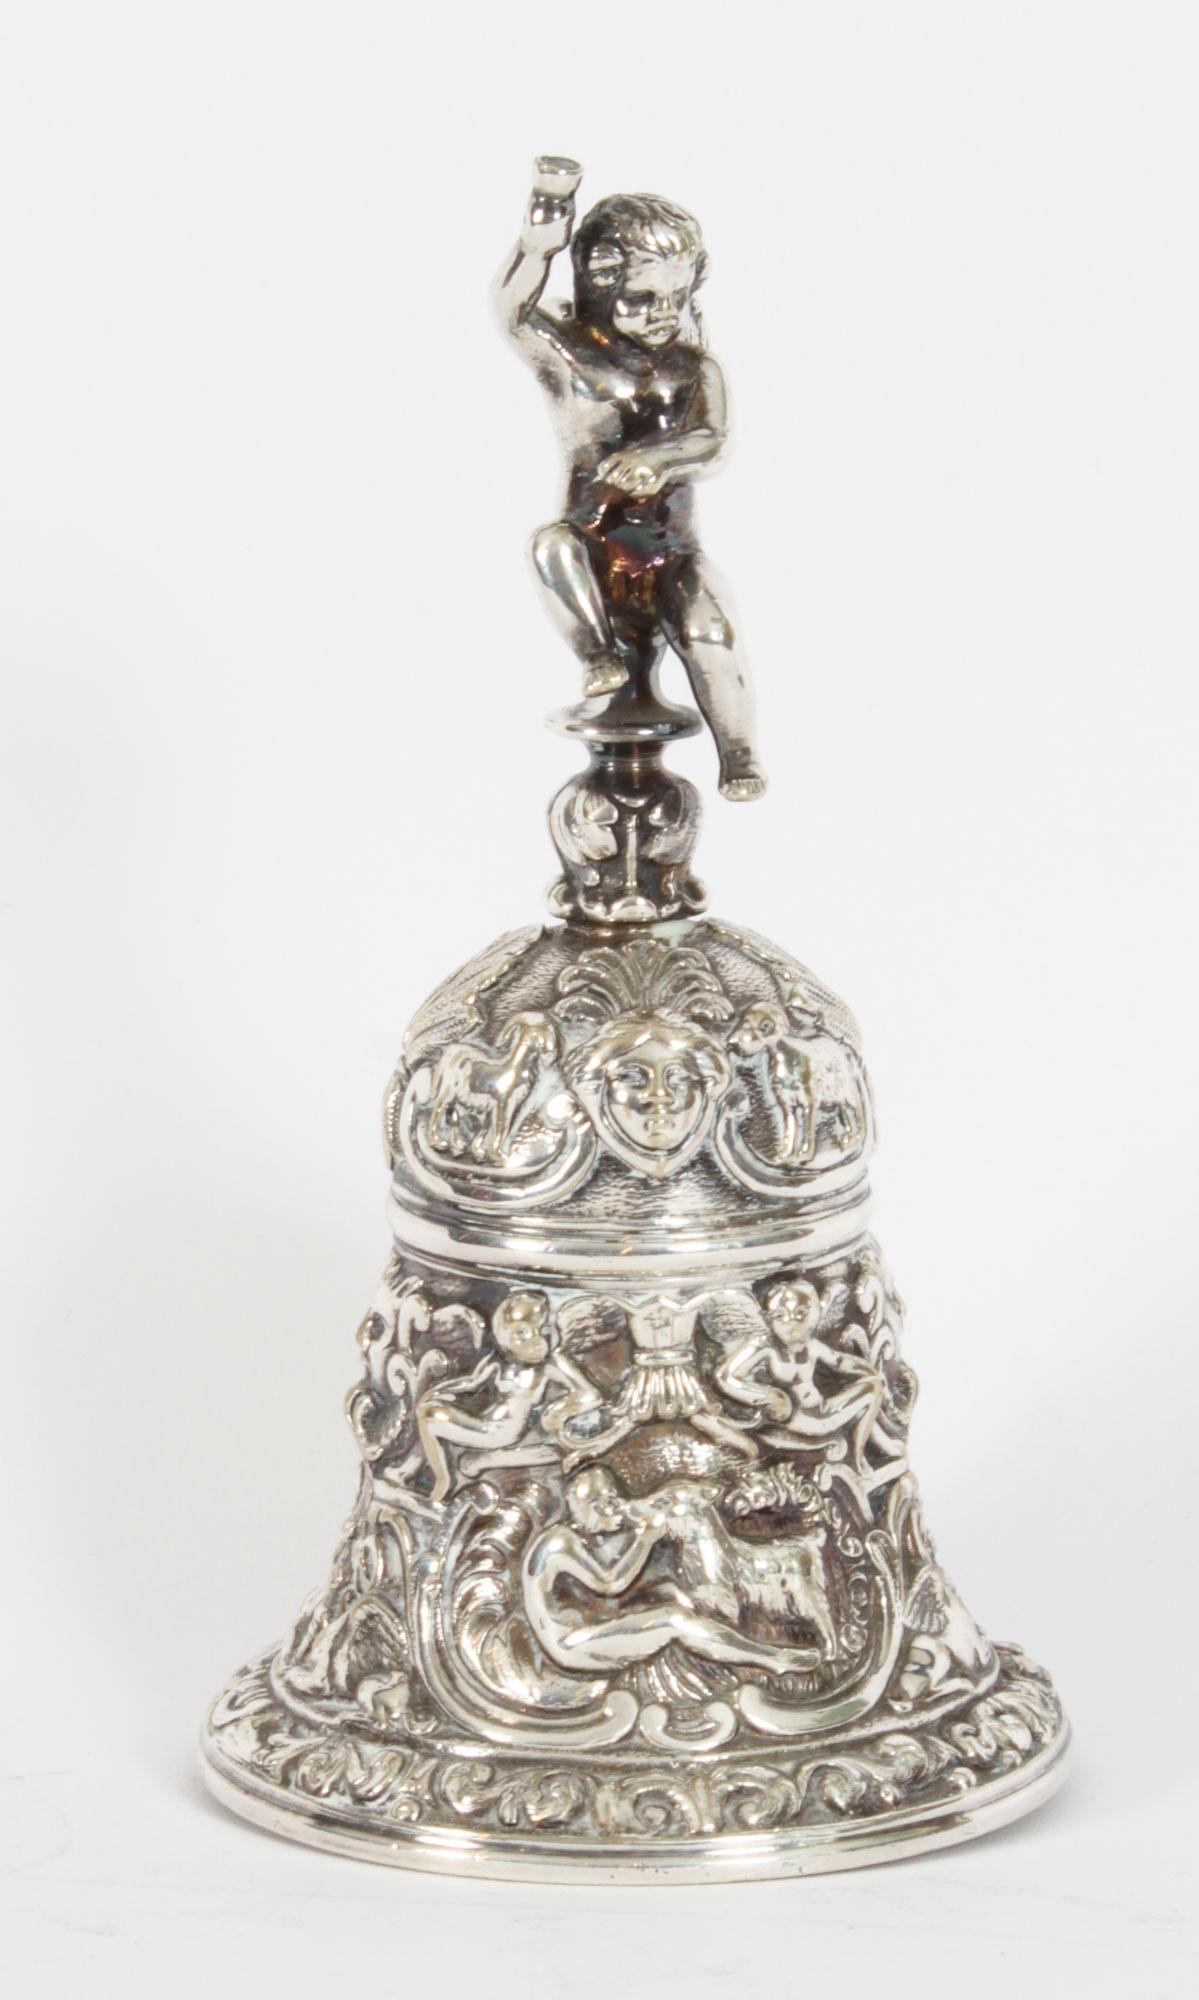 Antique silver plated Renaissance Revival Hand Bell by Elkington, late 19th century in date.
 
The heavy cast bell features the Renaissance profiles in ornately decorated panels to each side with a cupid handle to the top.
This bell is in truly